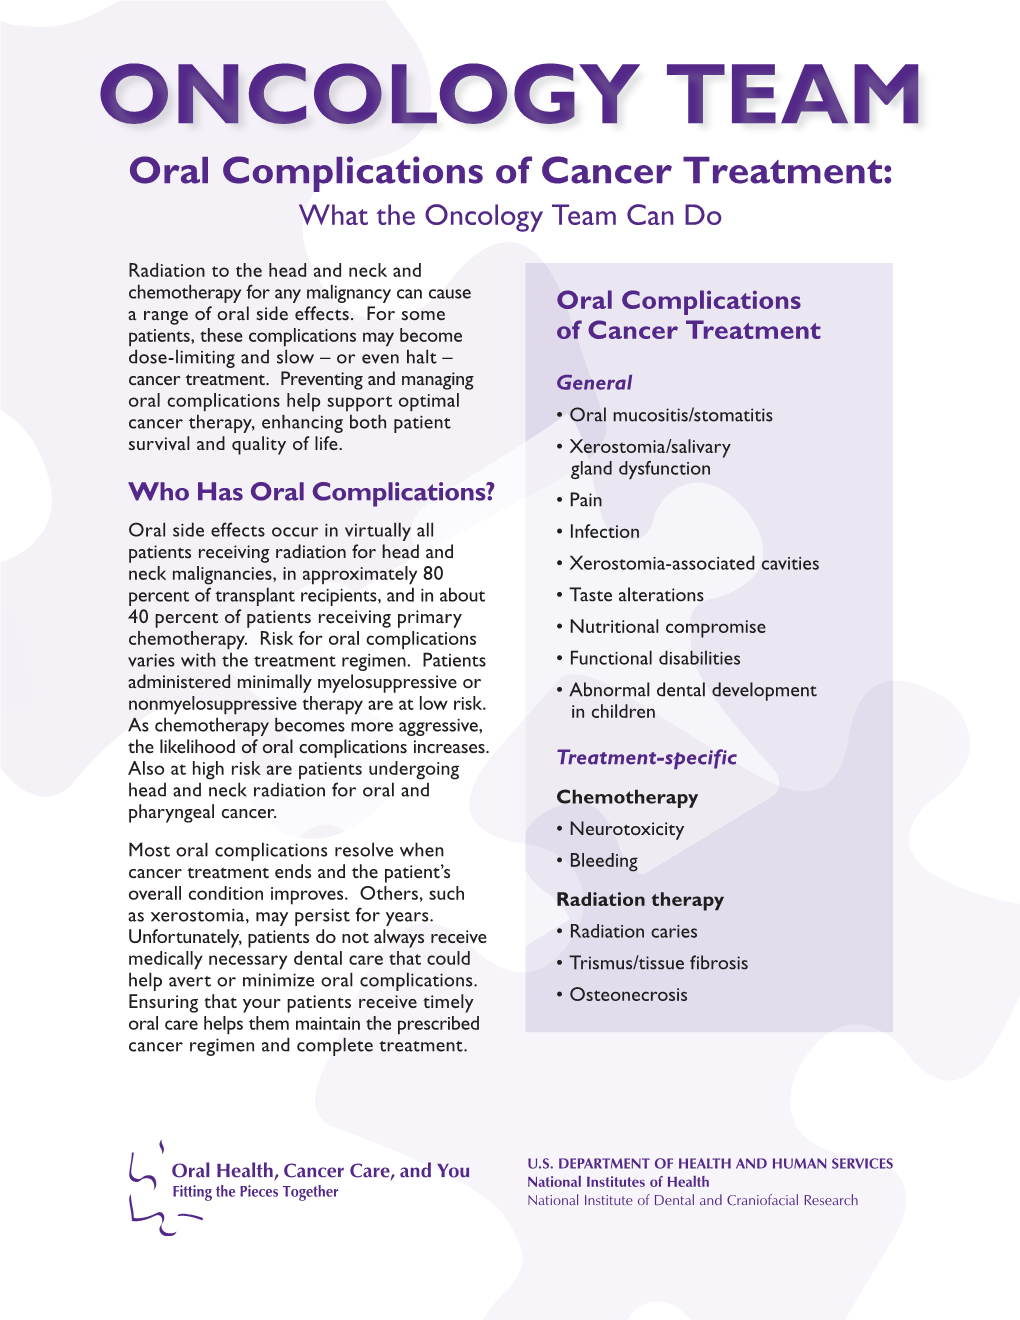 Oral Complications of Cancer Treatment: What the Oncology Team Can Do